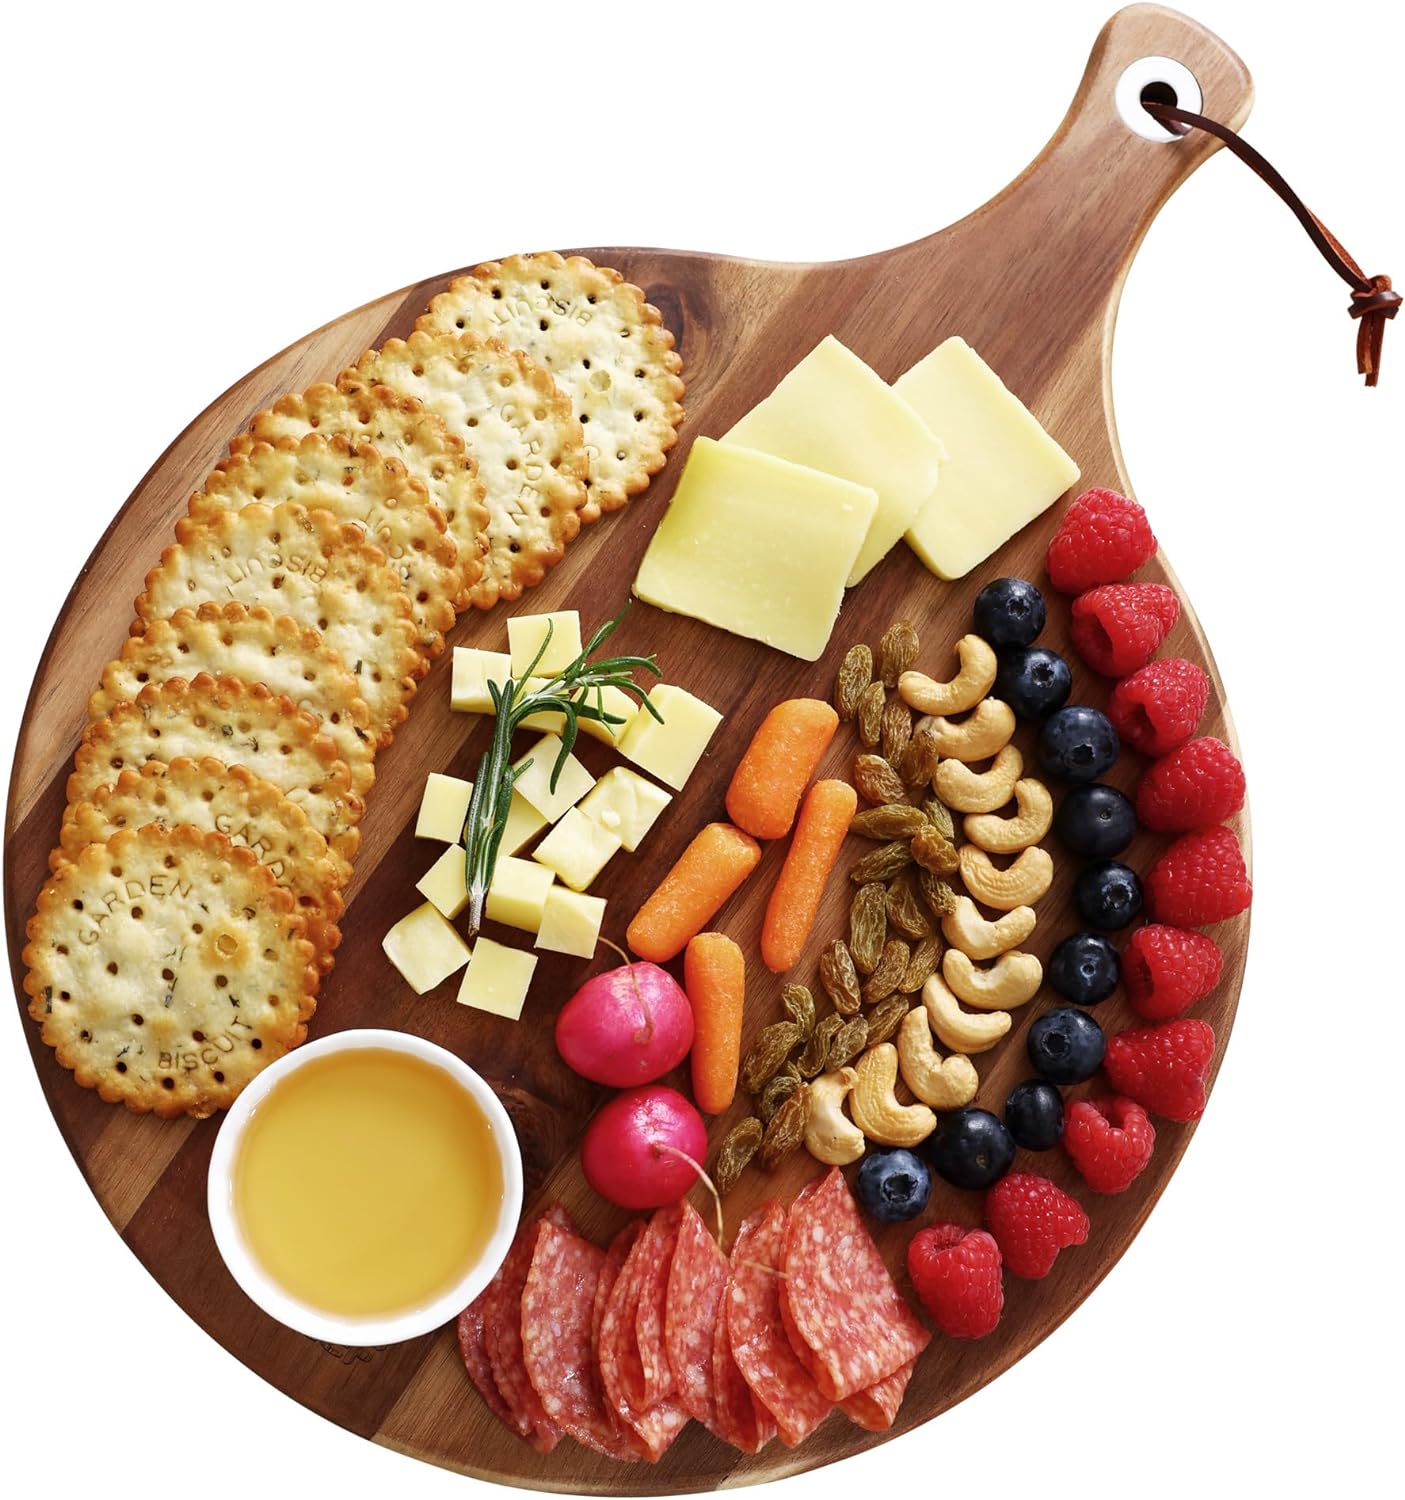 Wooden Cutting Board with Handle Kitchen Household Serving Board Wooden  Cheese Board Charcuterie Board for Bread Fruit Plates